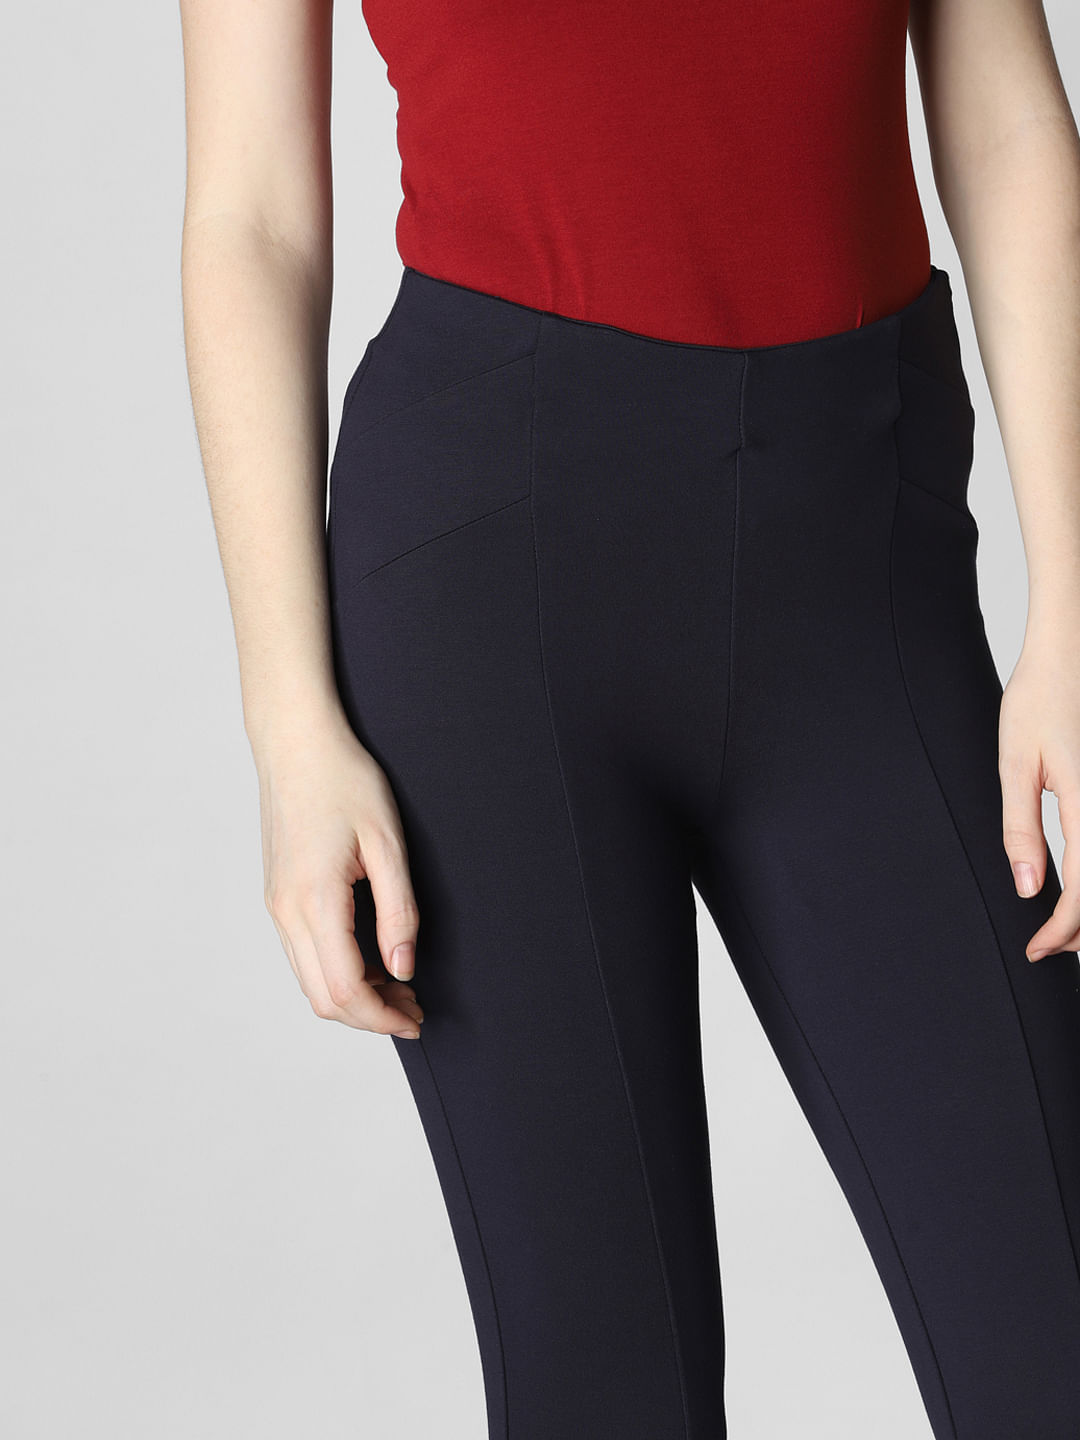 More Tips to Help Make Your Leggings Fit You Better - Its All Leggings